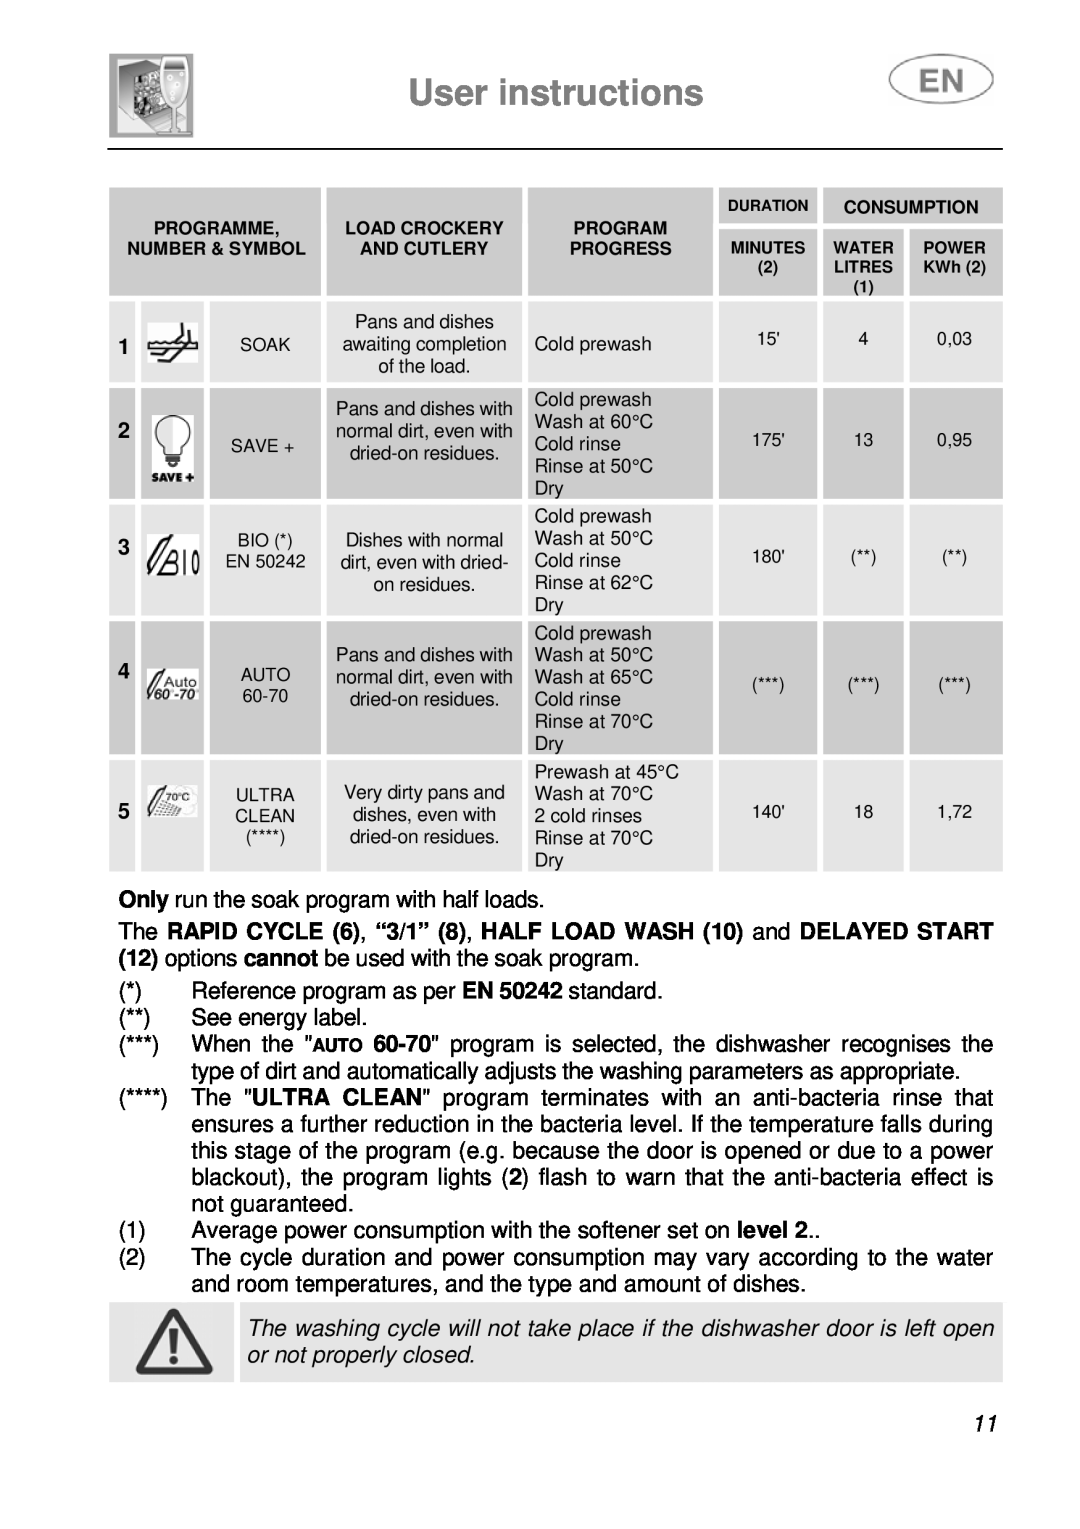 Smeg STA643PQ manual User instructions, The RAPID CYCLE 6, “3/1” 8, HALF LOAD WASH 10 and DELAYED START 